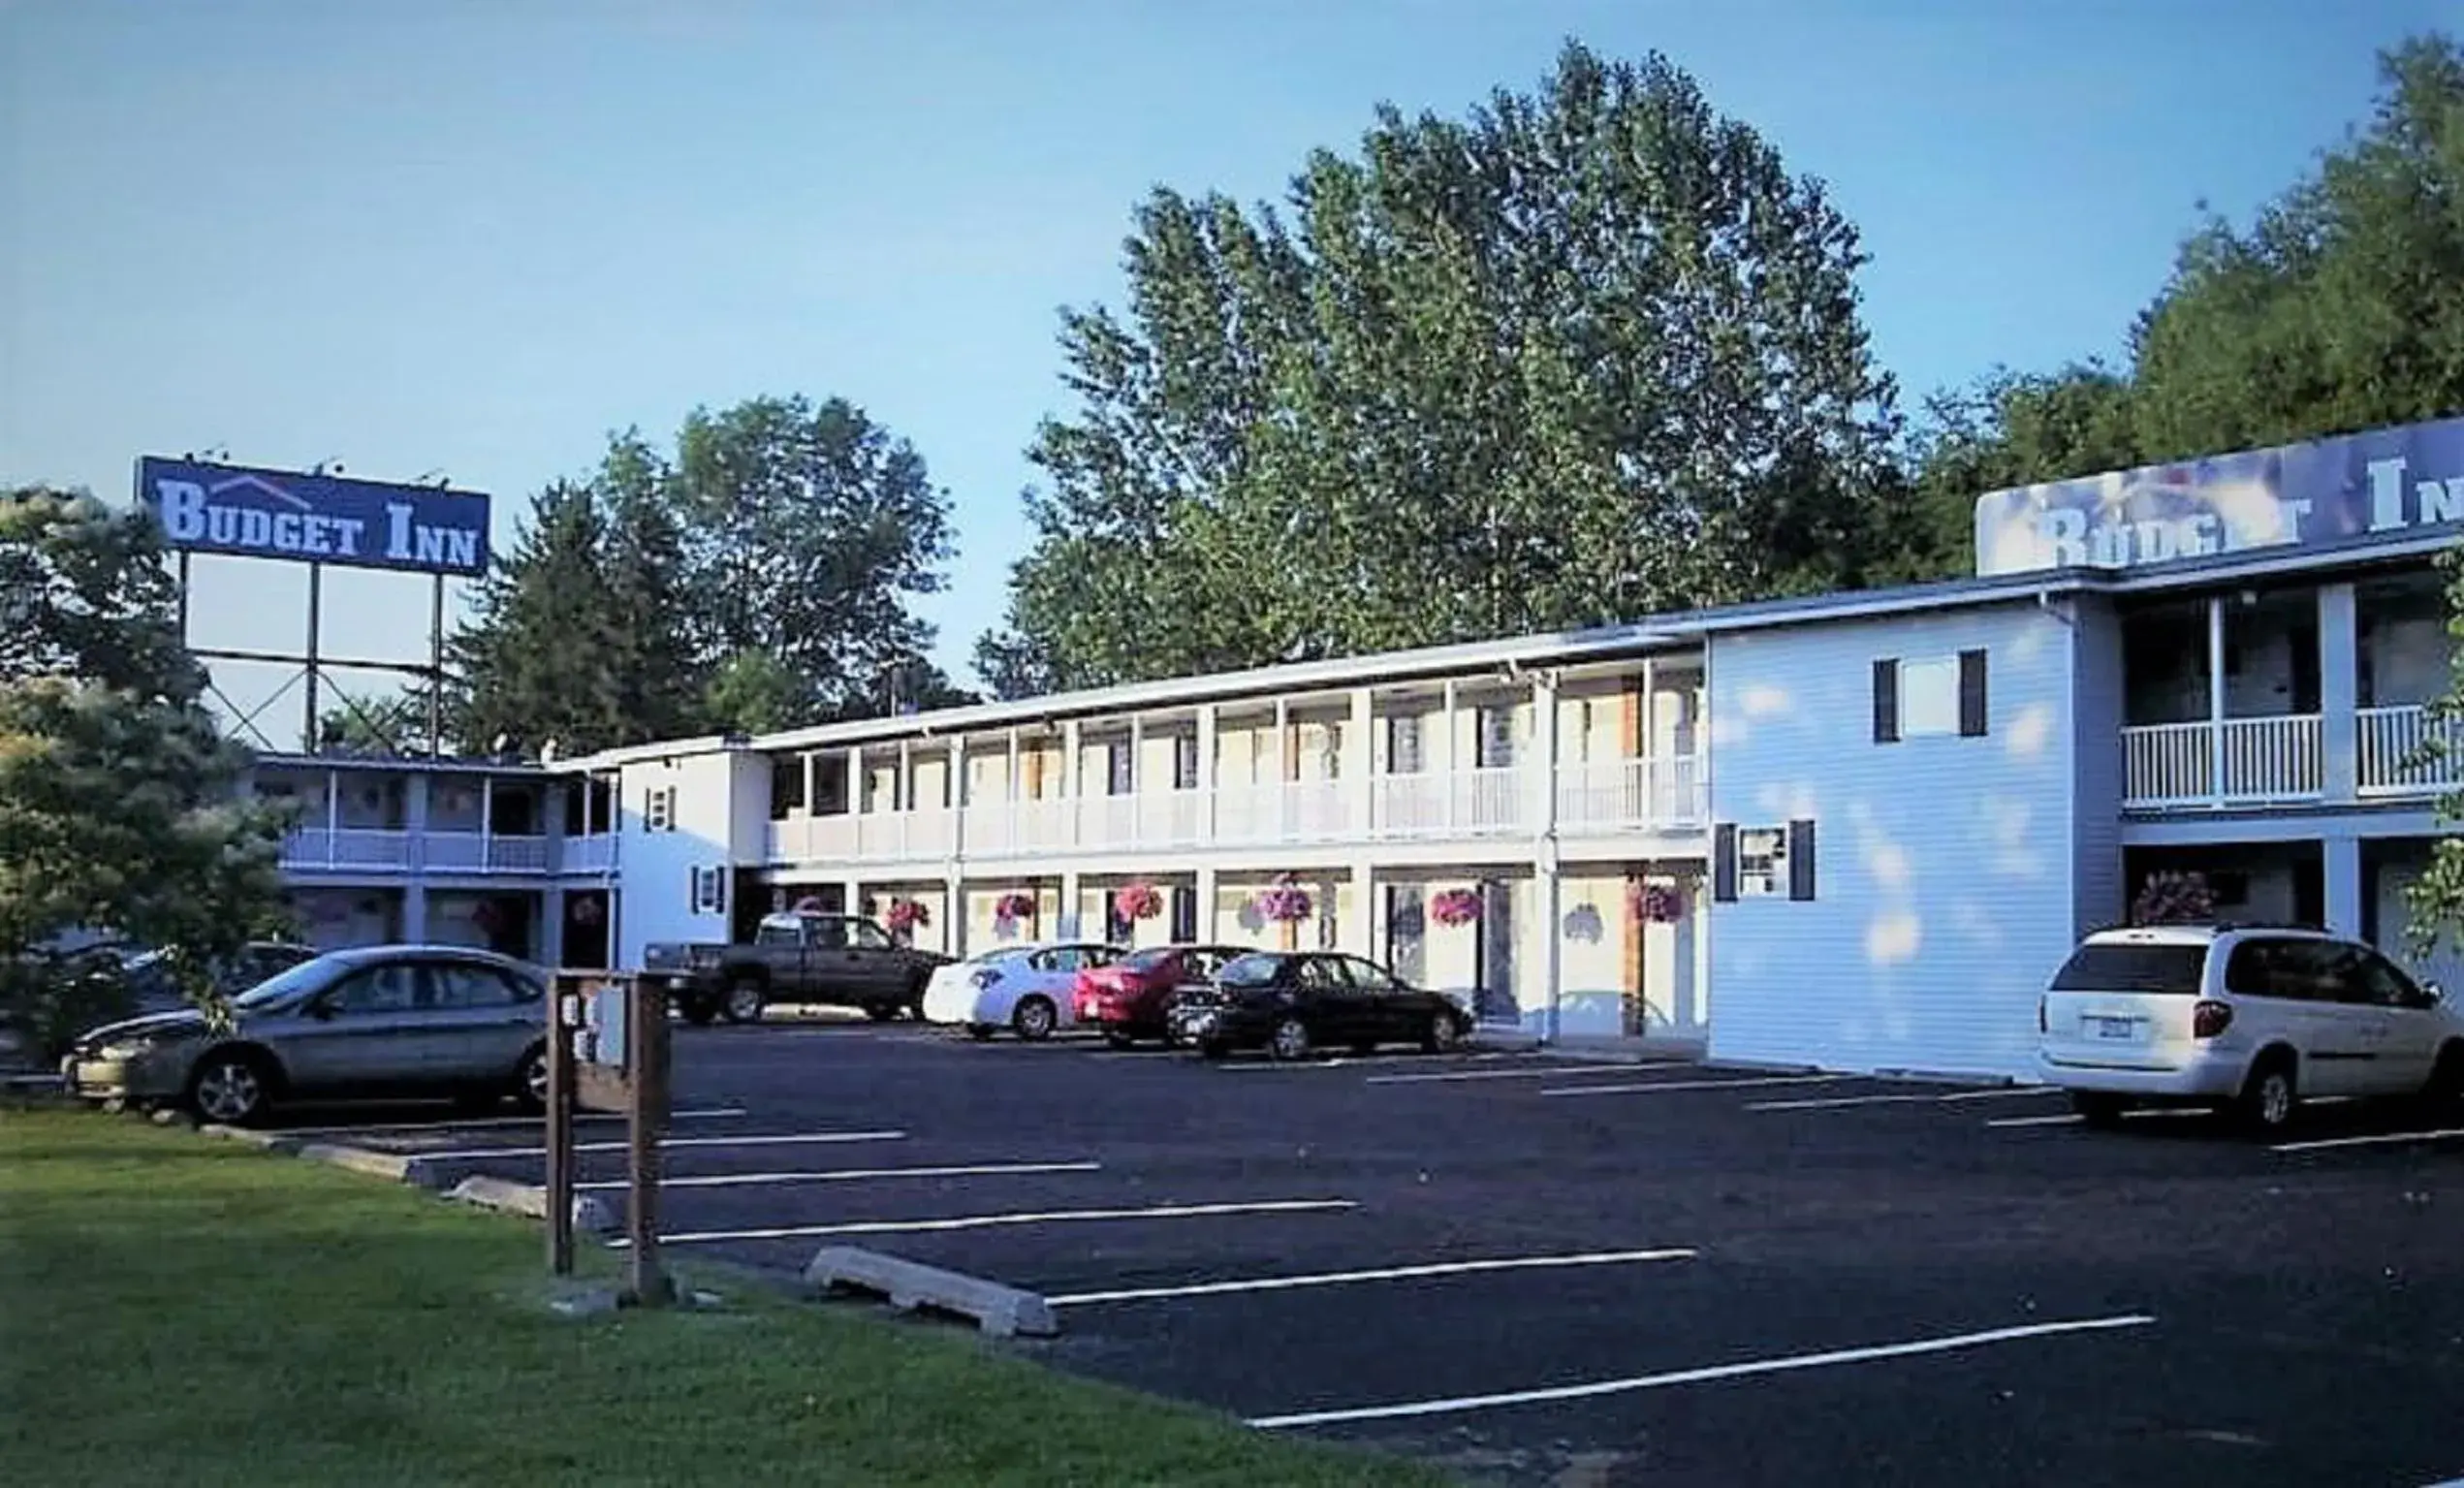 Property Building in Budget Inn Cicero